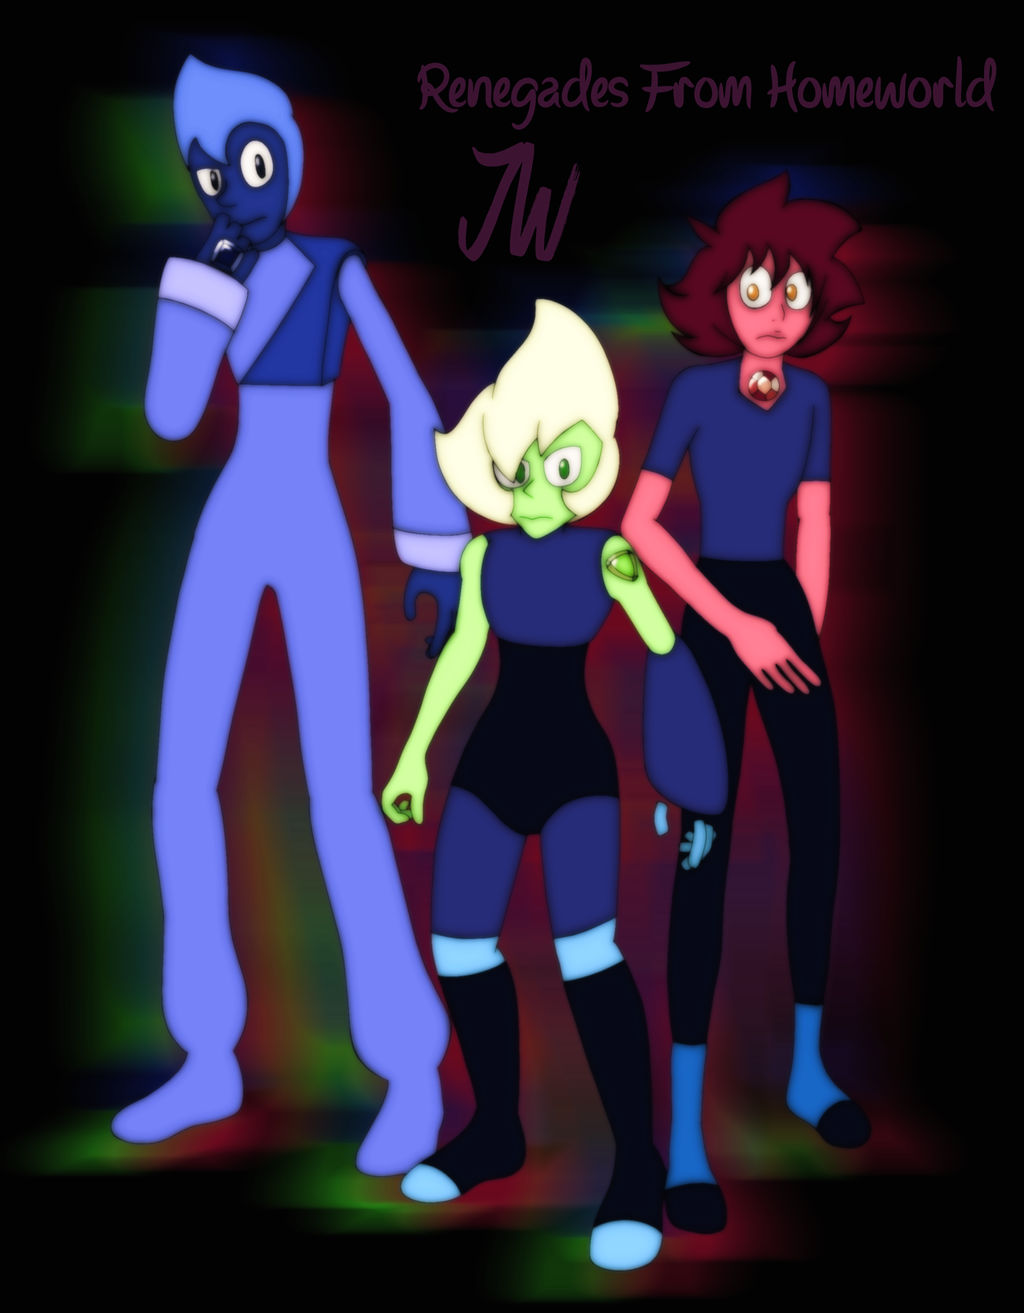 RFH (A fan-made spin off of Steven Universe)